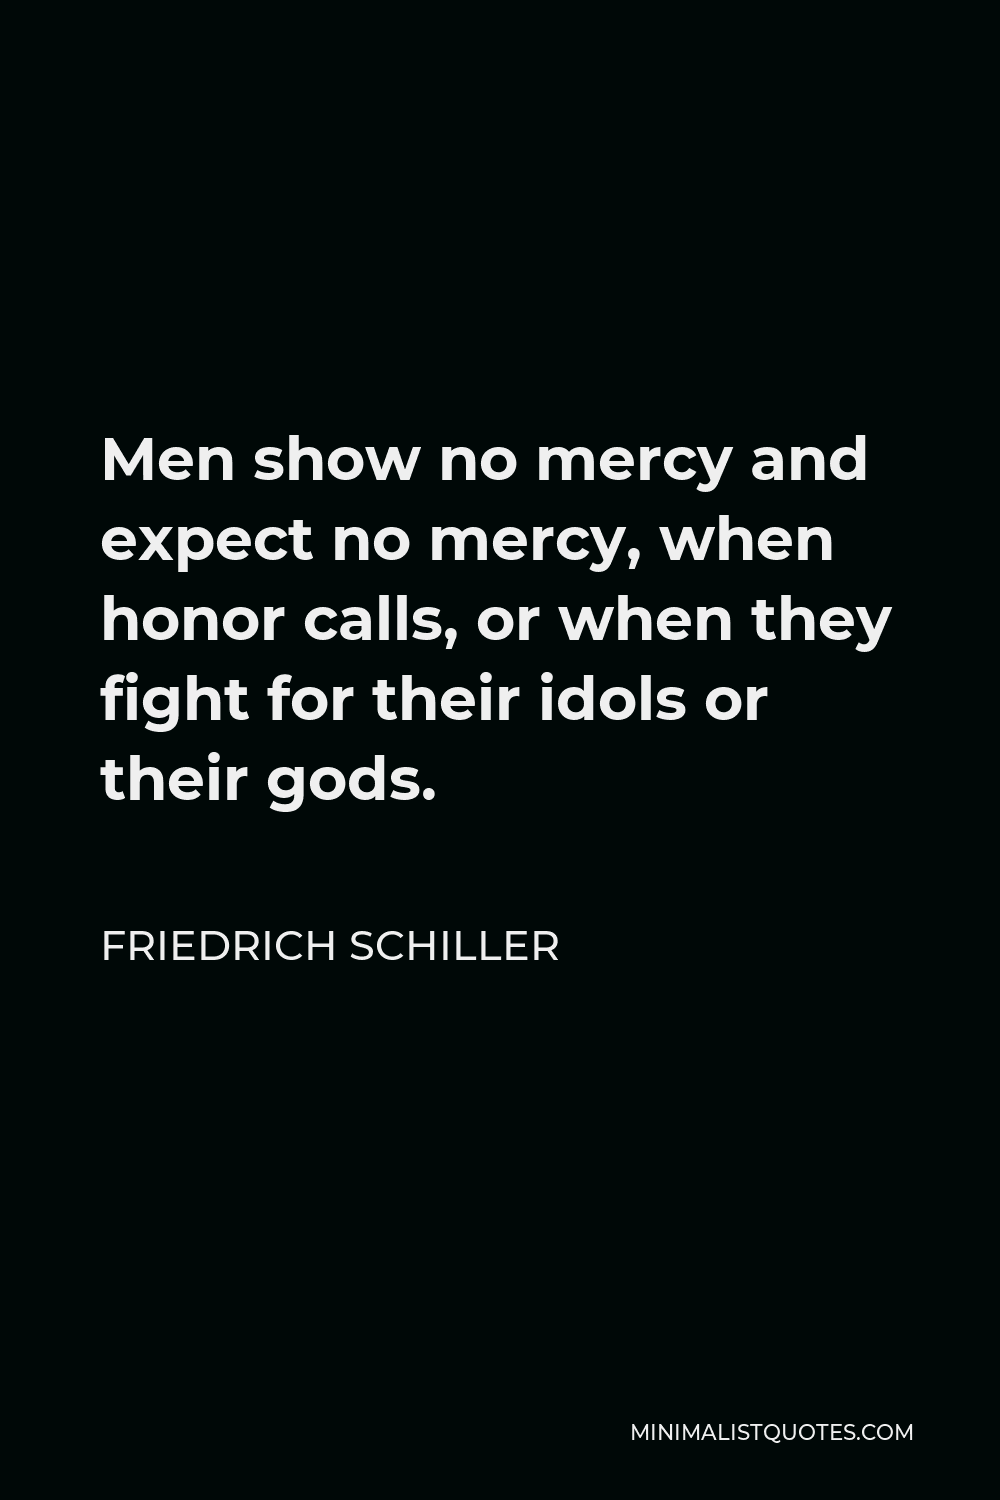 Friedrich Schiller Quote - Men show no mercy and expect no mercy, when honor calls, or when they fight for their idols or their gods.